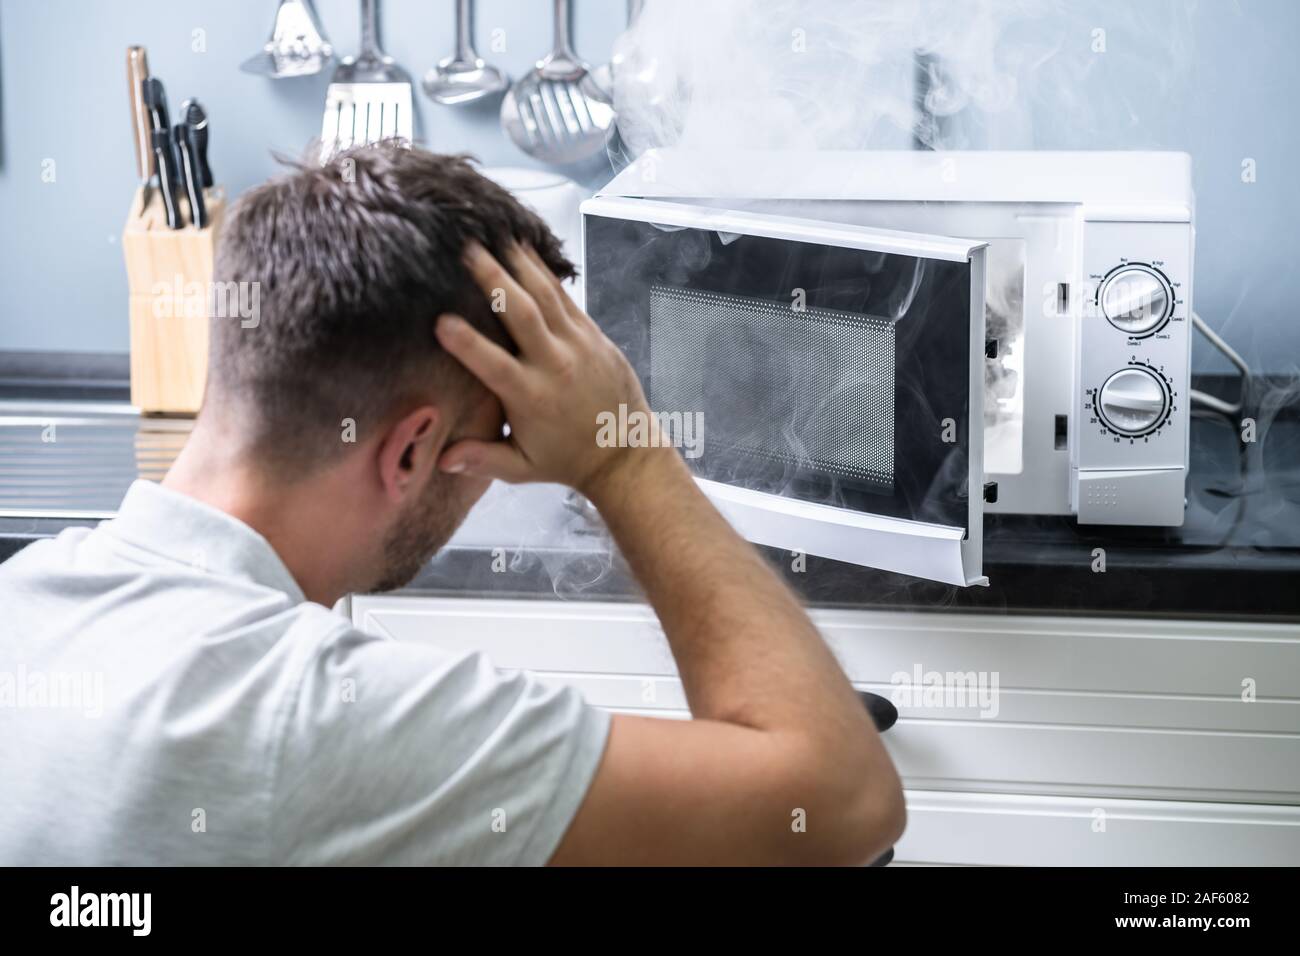 Young Man Spraying Fire Extinguisher On Microwave Oven In The Kitchen Stock Photo